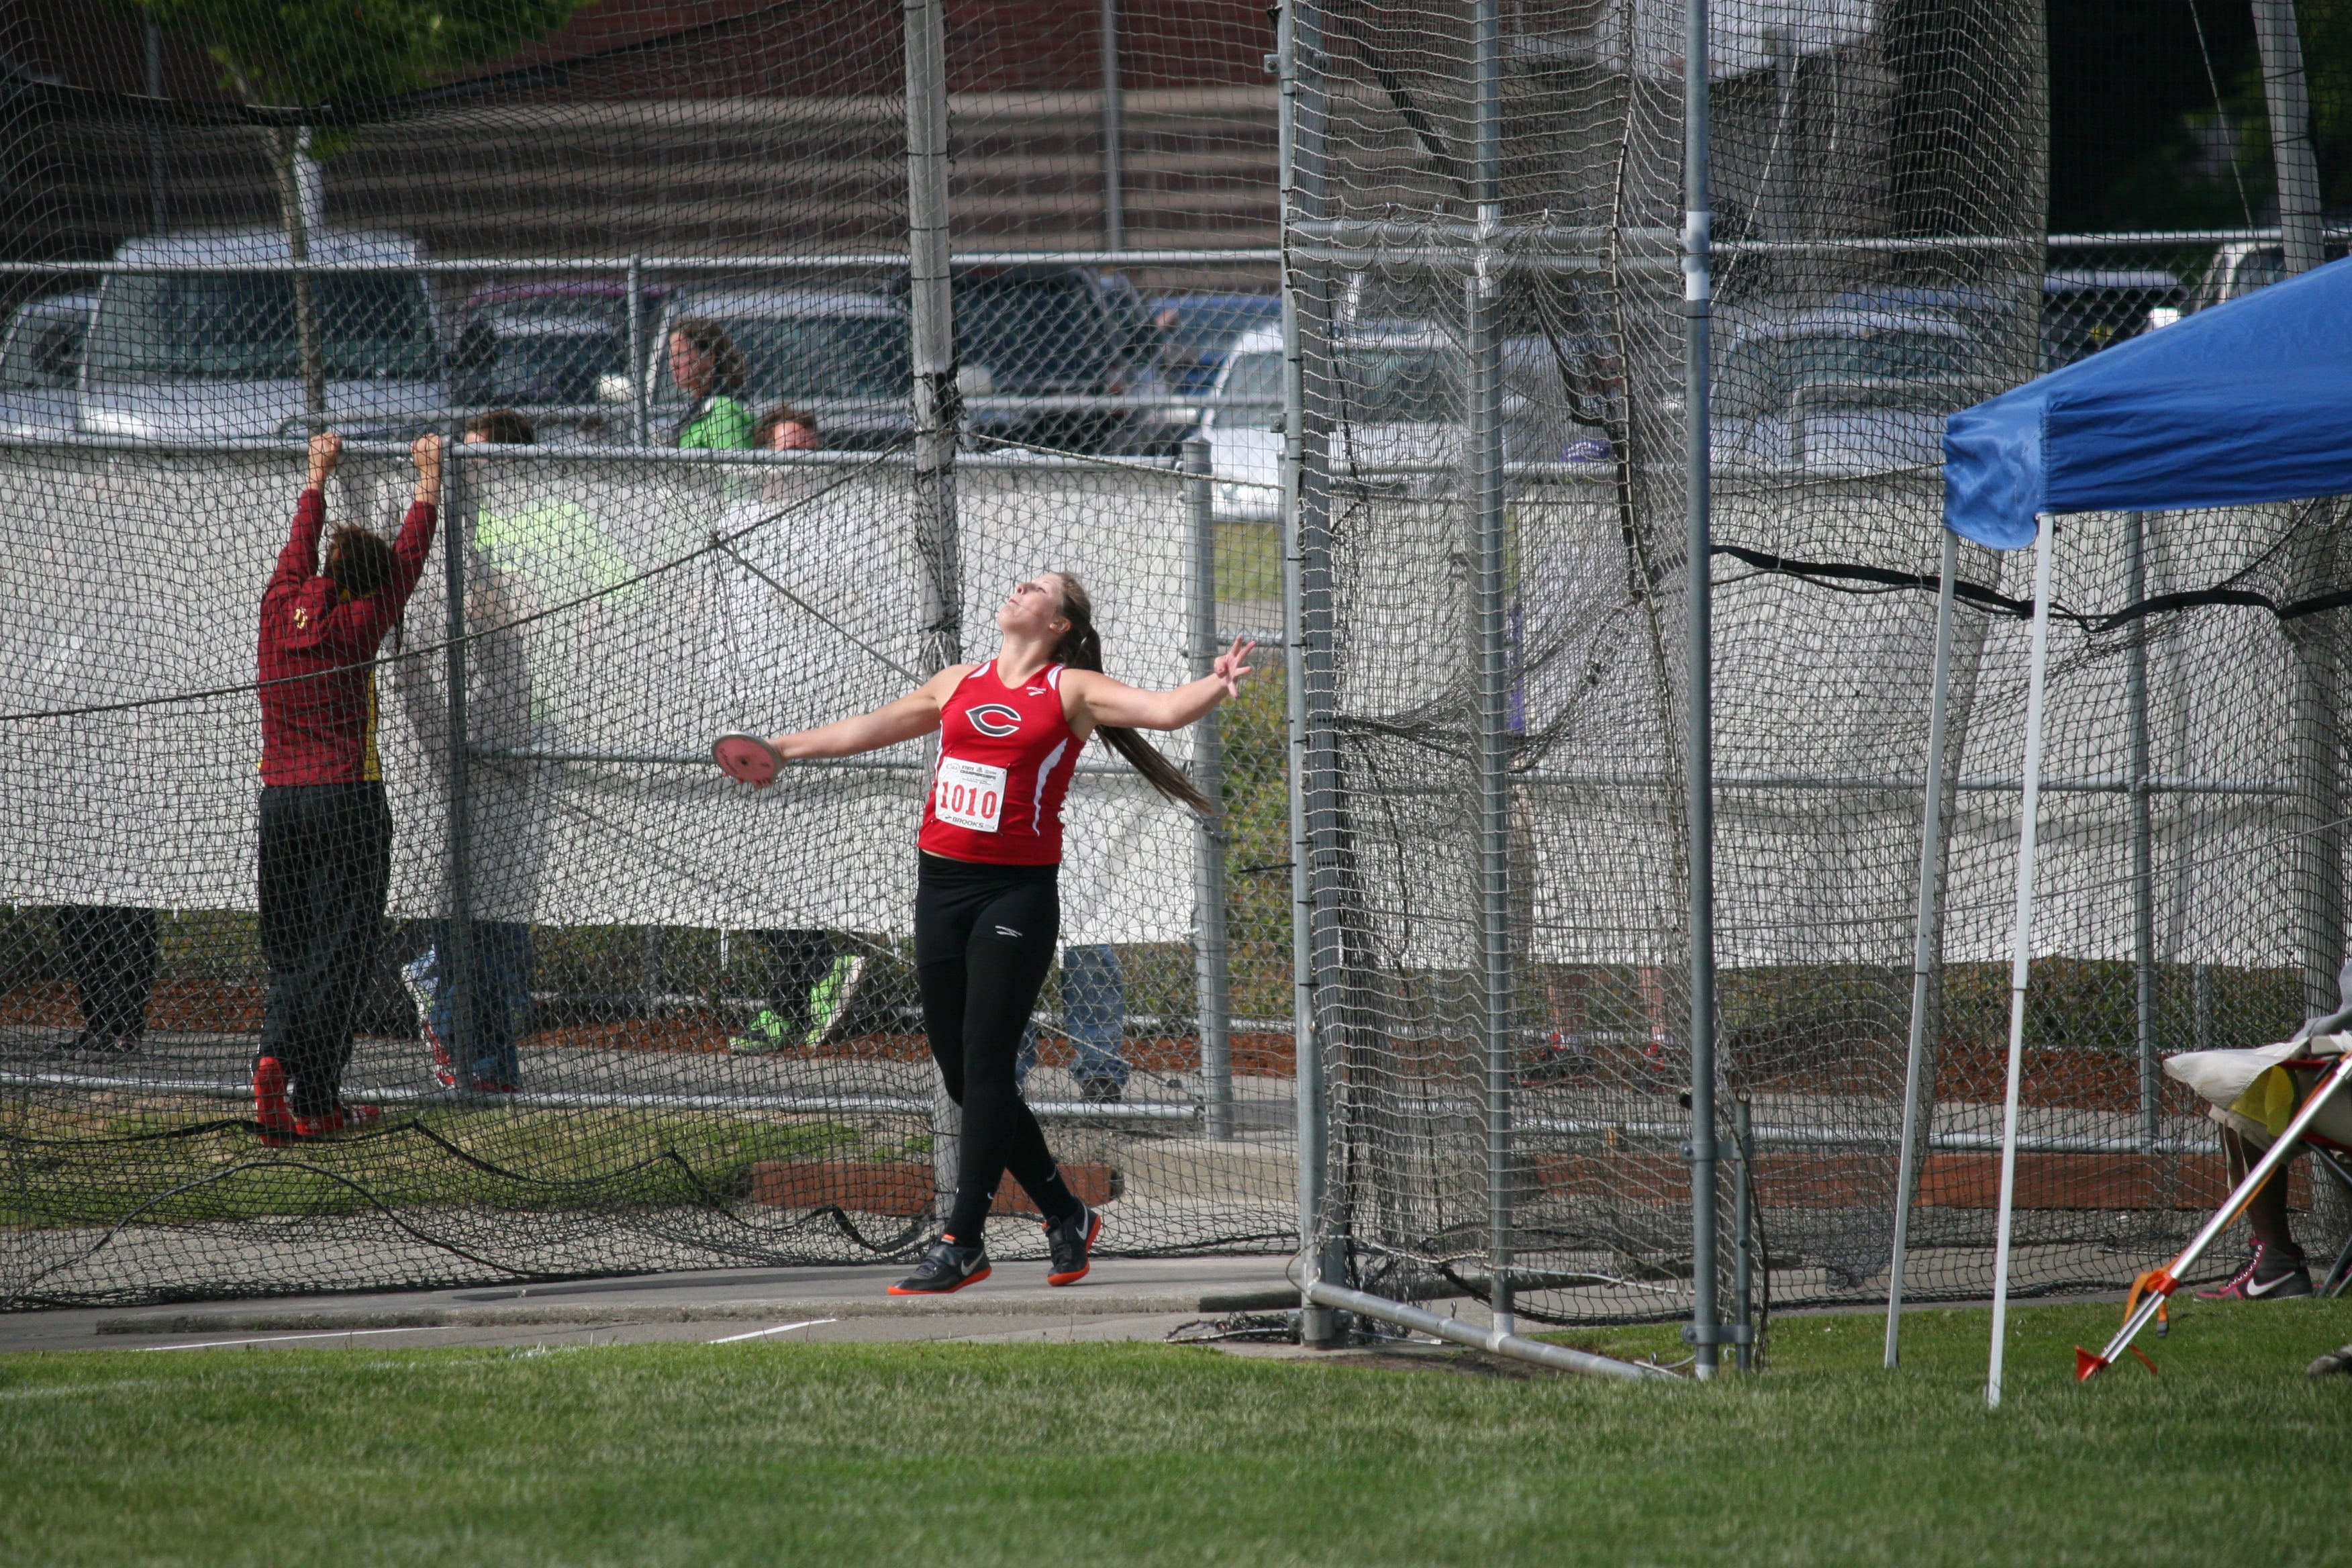 Nikki Corbett finished second place in the discus.